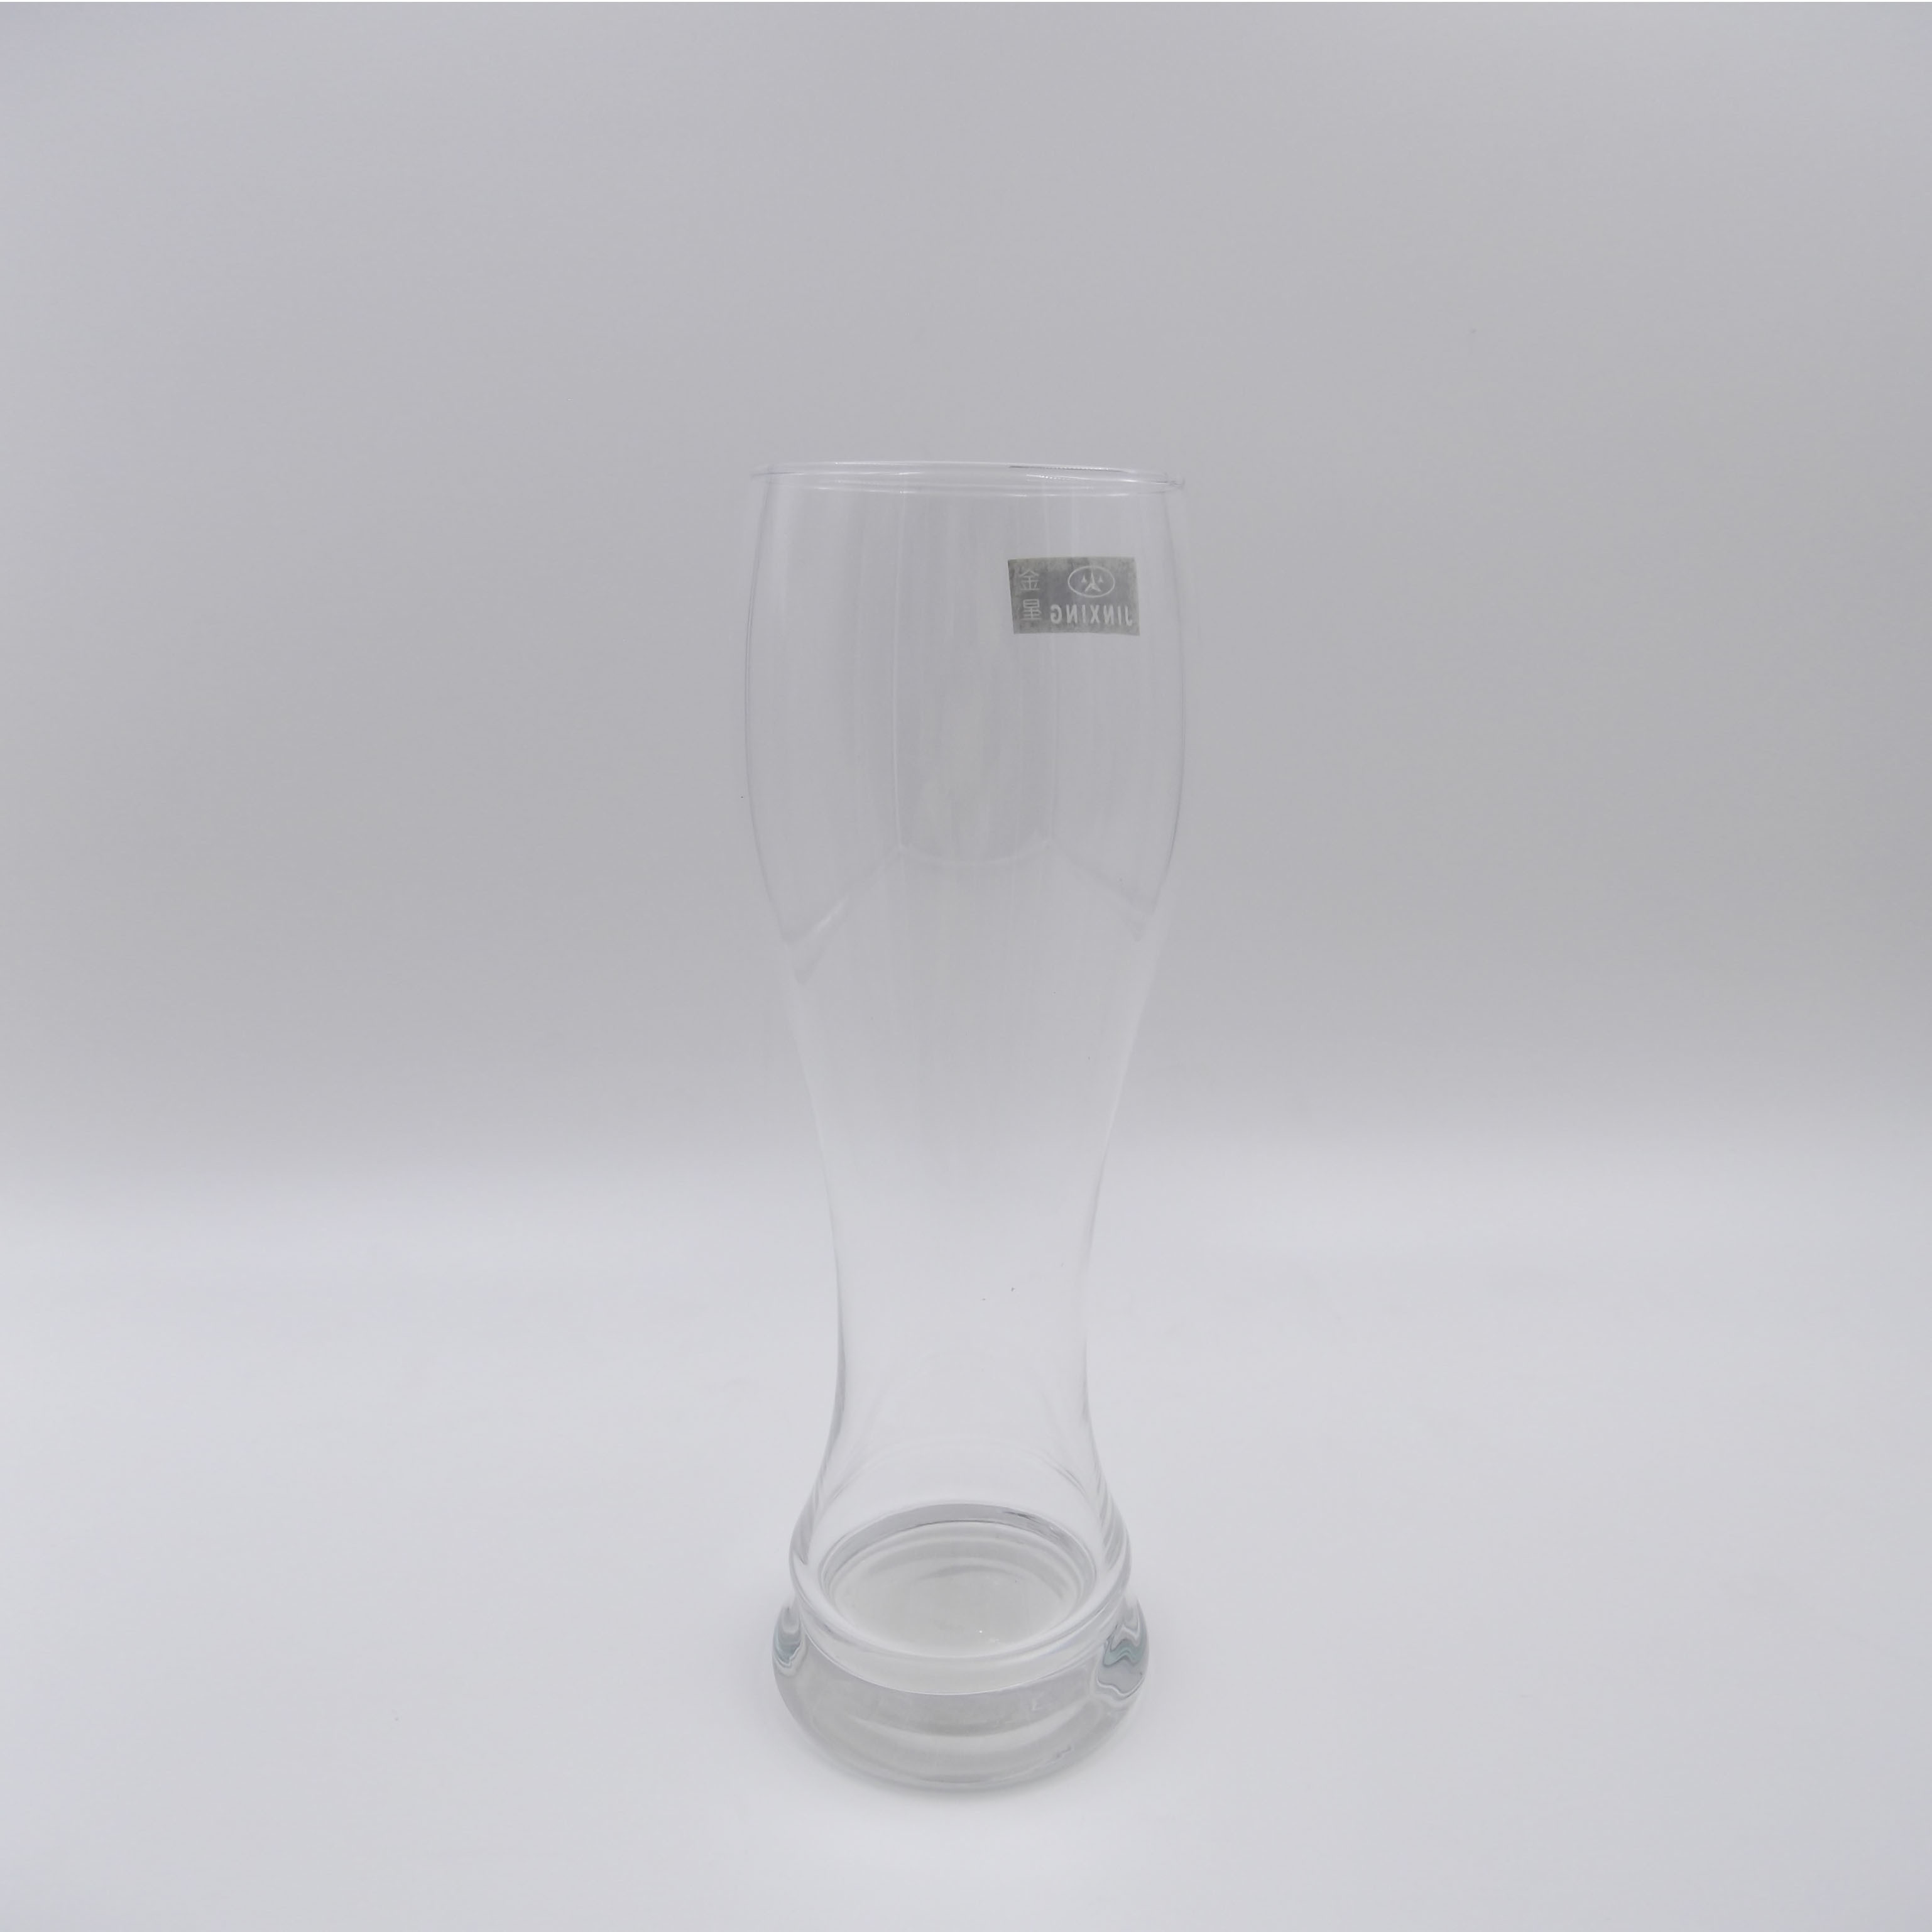 0.5L Glassware Cup, Sipirits Drinking Cup, Glass Water Cup